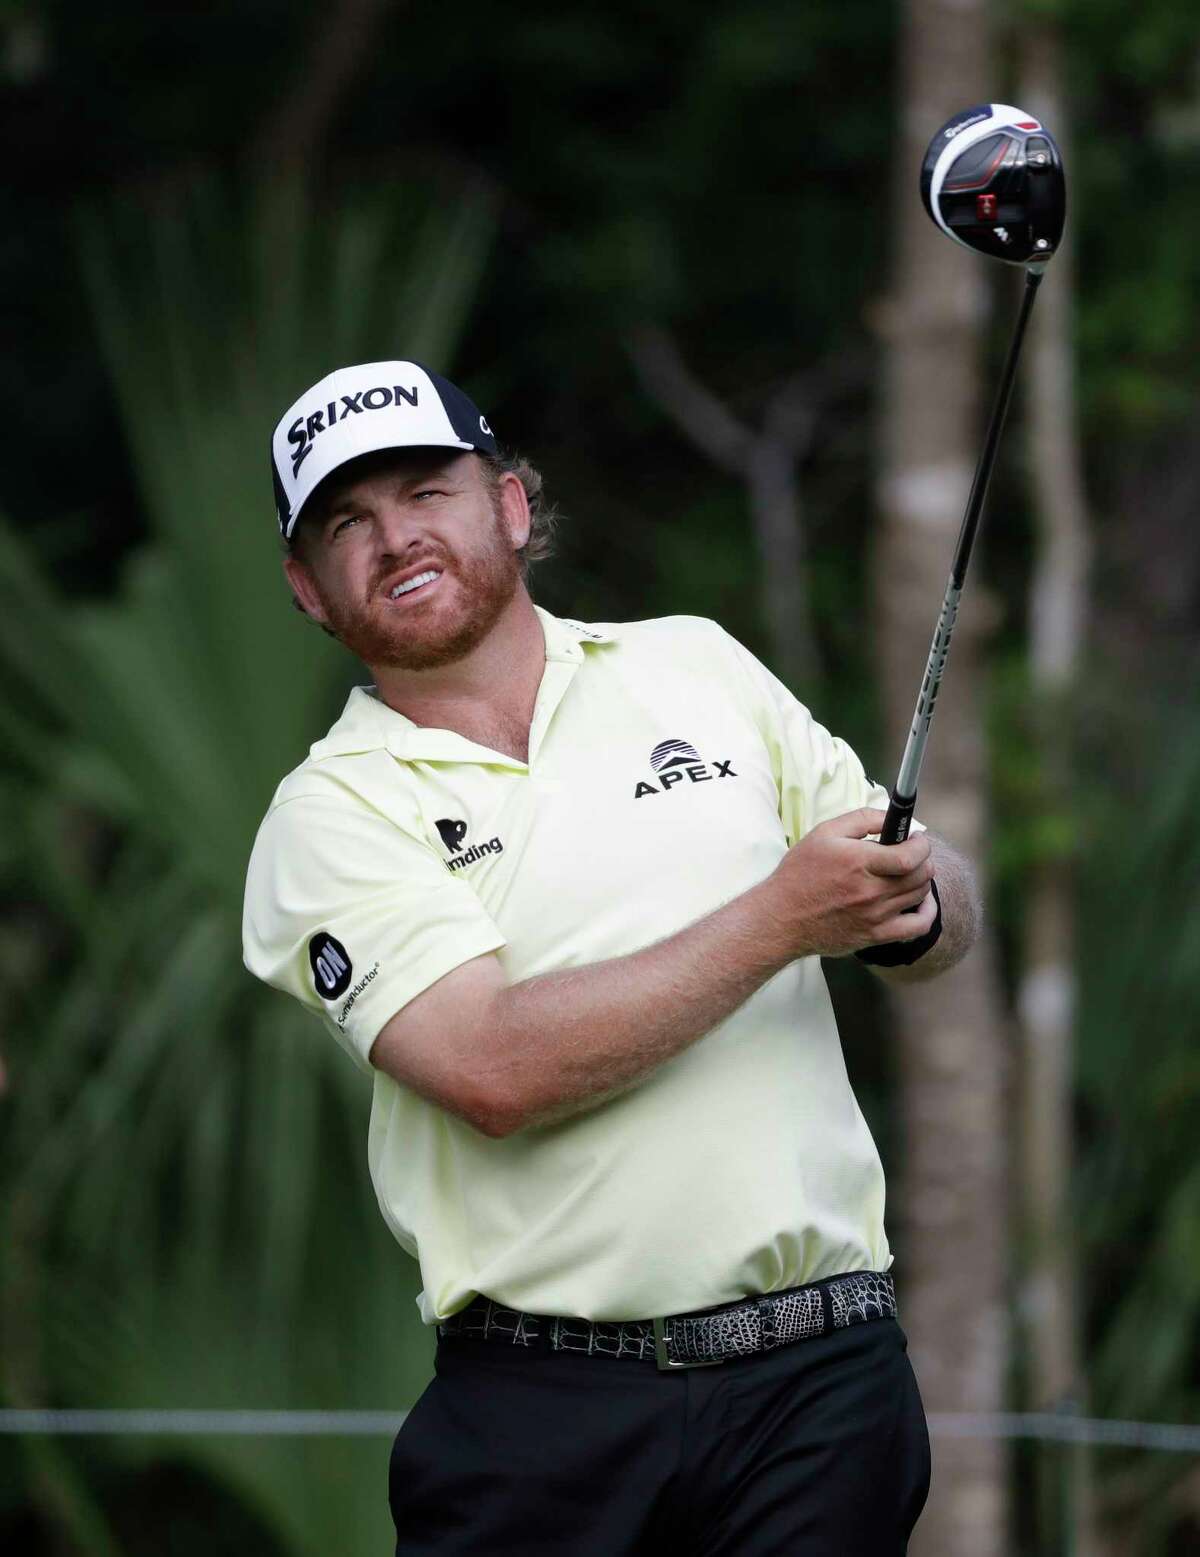 J.B. Holmes watches his shot from the 15th tee during the third round of The Players Championship golf tournament Saturday, May 13, 2017, in Ponte Vedra Beach, Fla. (AP Photo/Chris O'Meara)